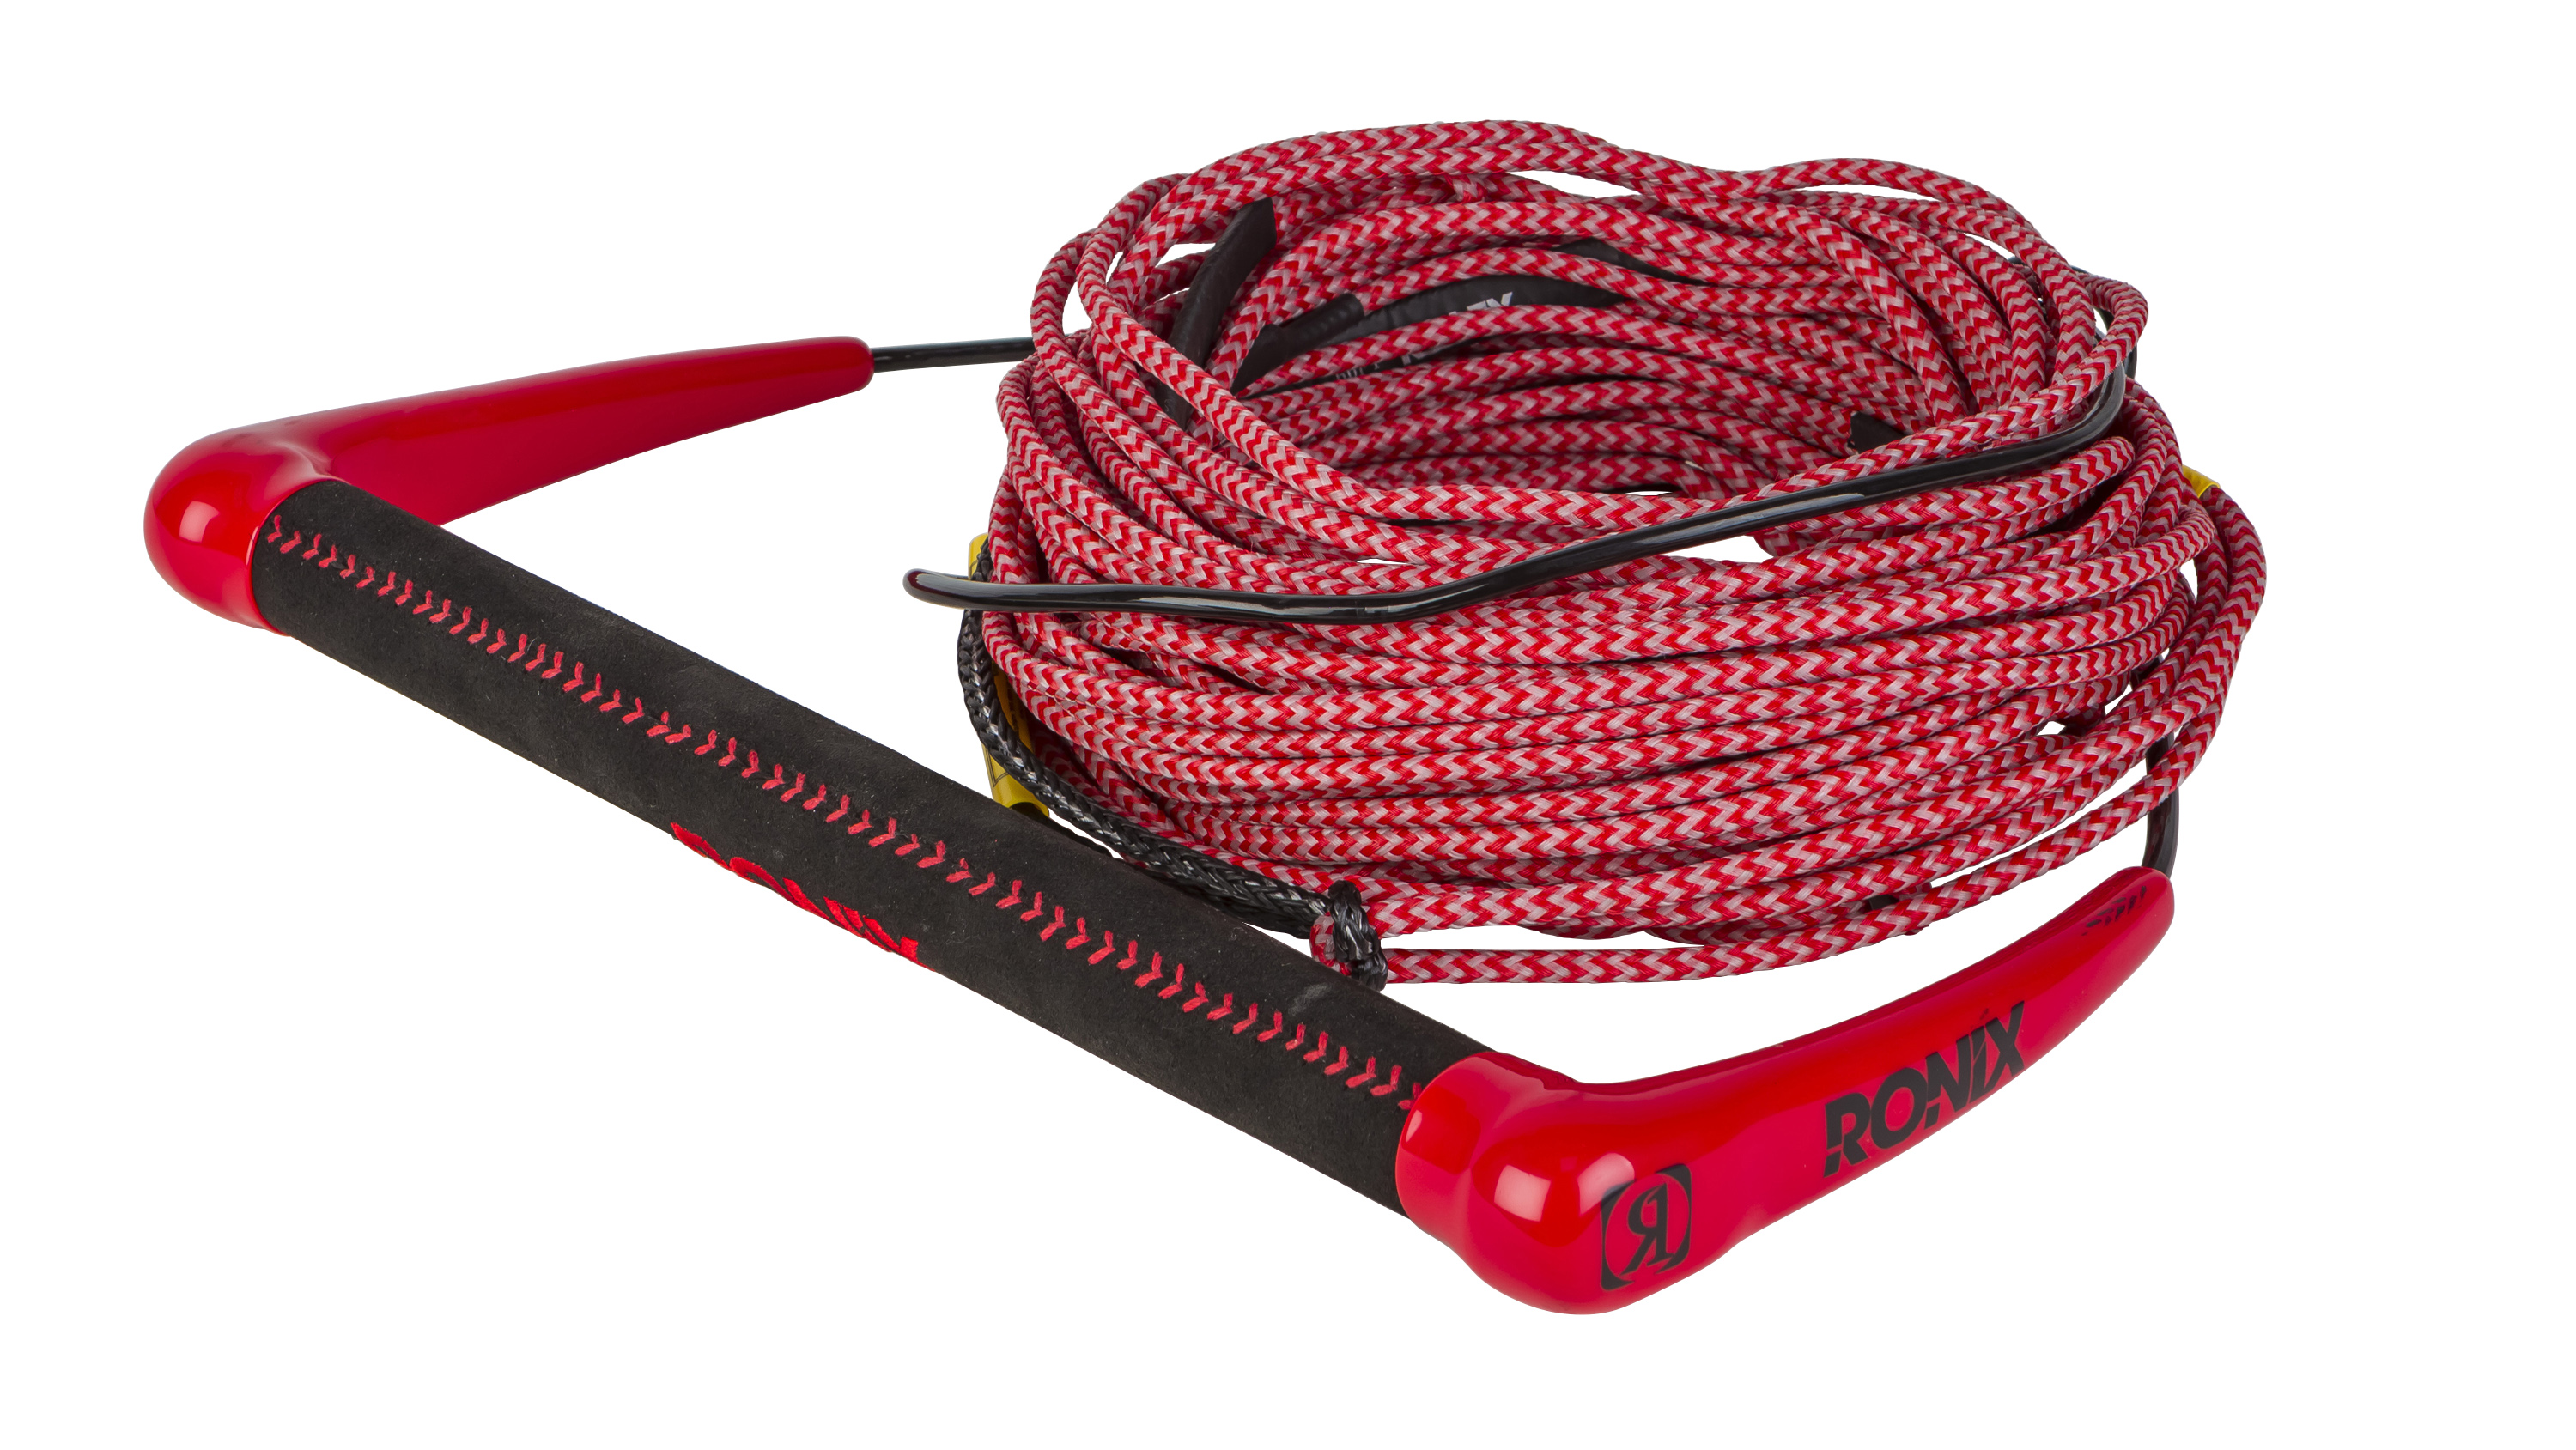   COMBO 3.0 HIDE GRIP W/70 FT SOLIN ROPE PACKAGE RONIX 2019